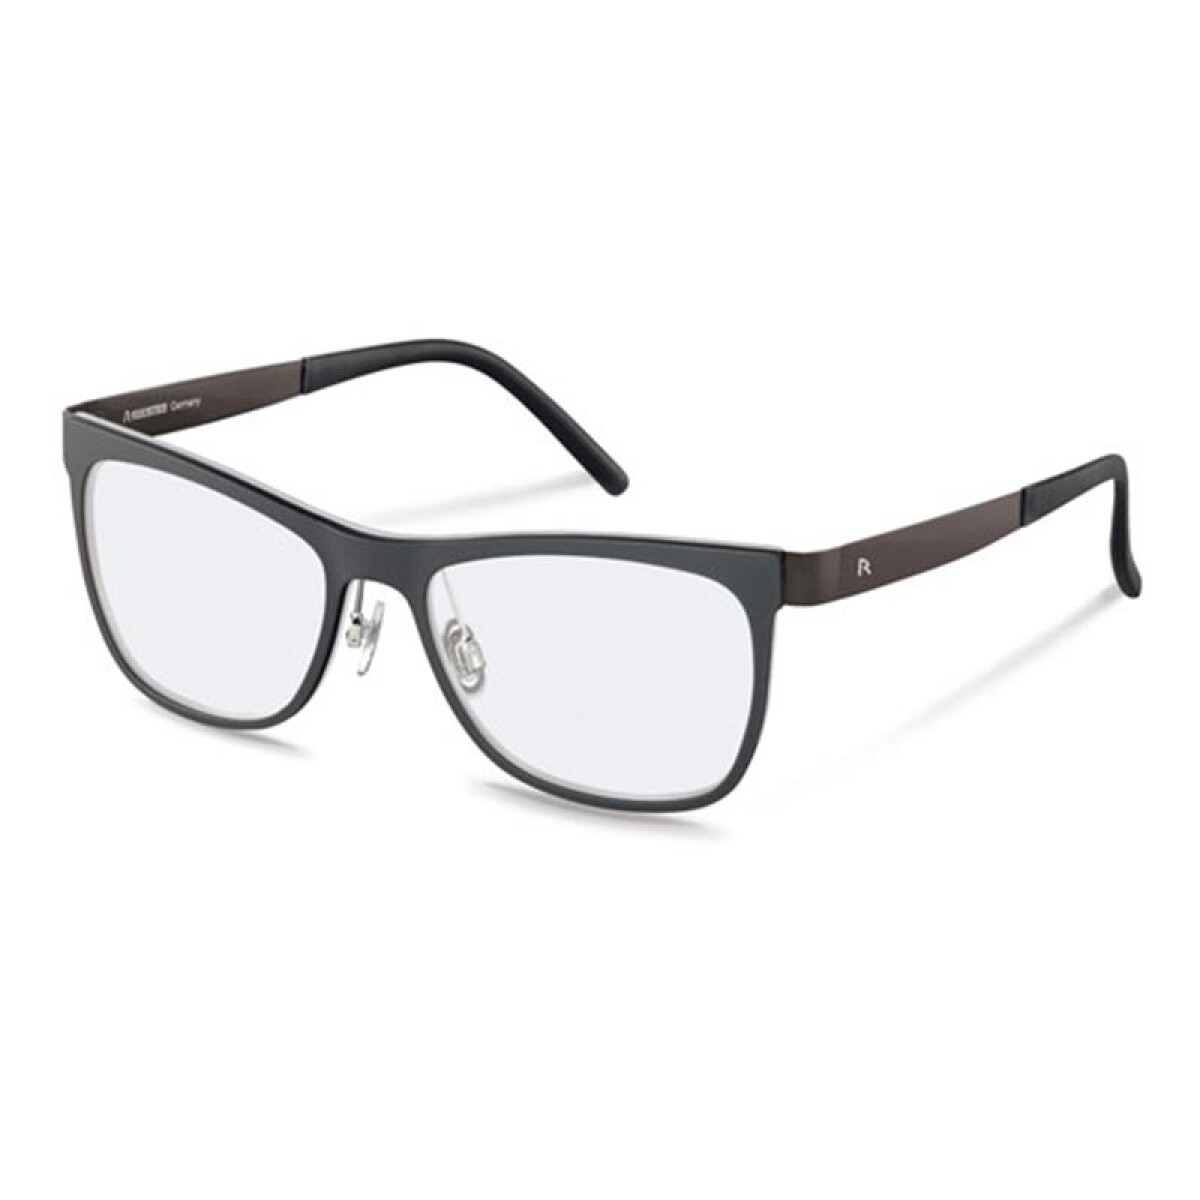 Rodenstock 7010 - A 